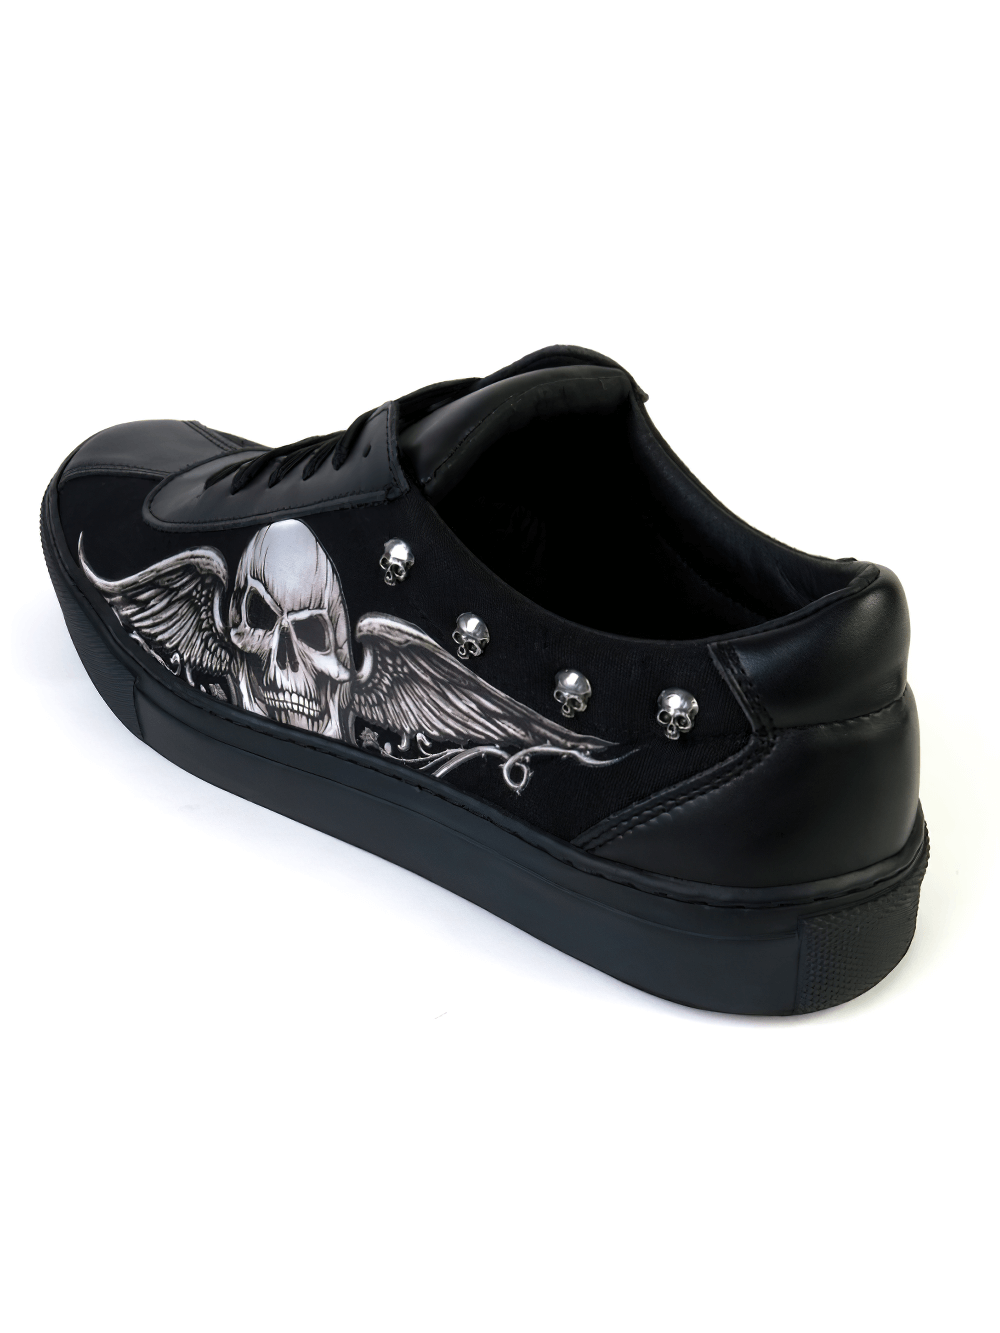 Skull and Wings Black Canvas Sneakers with Rubber Sole